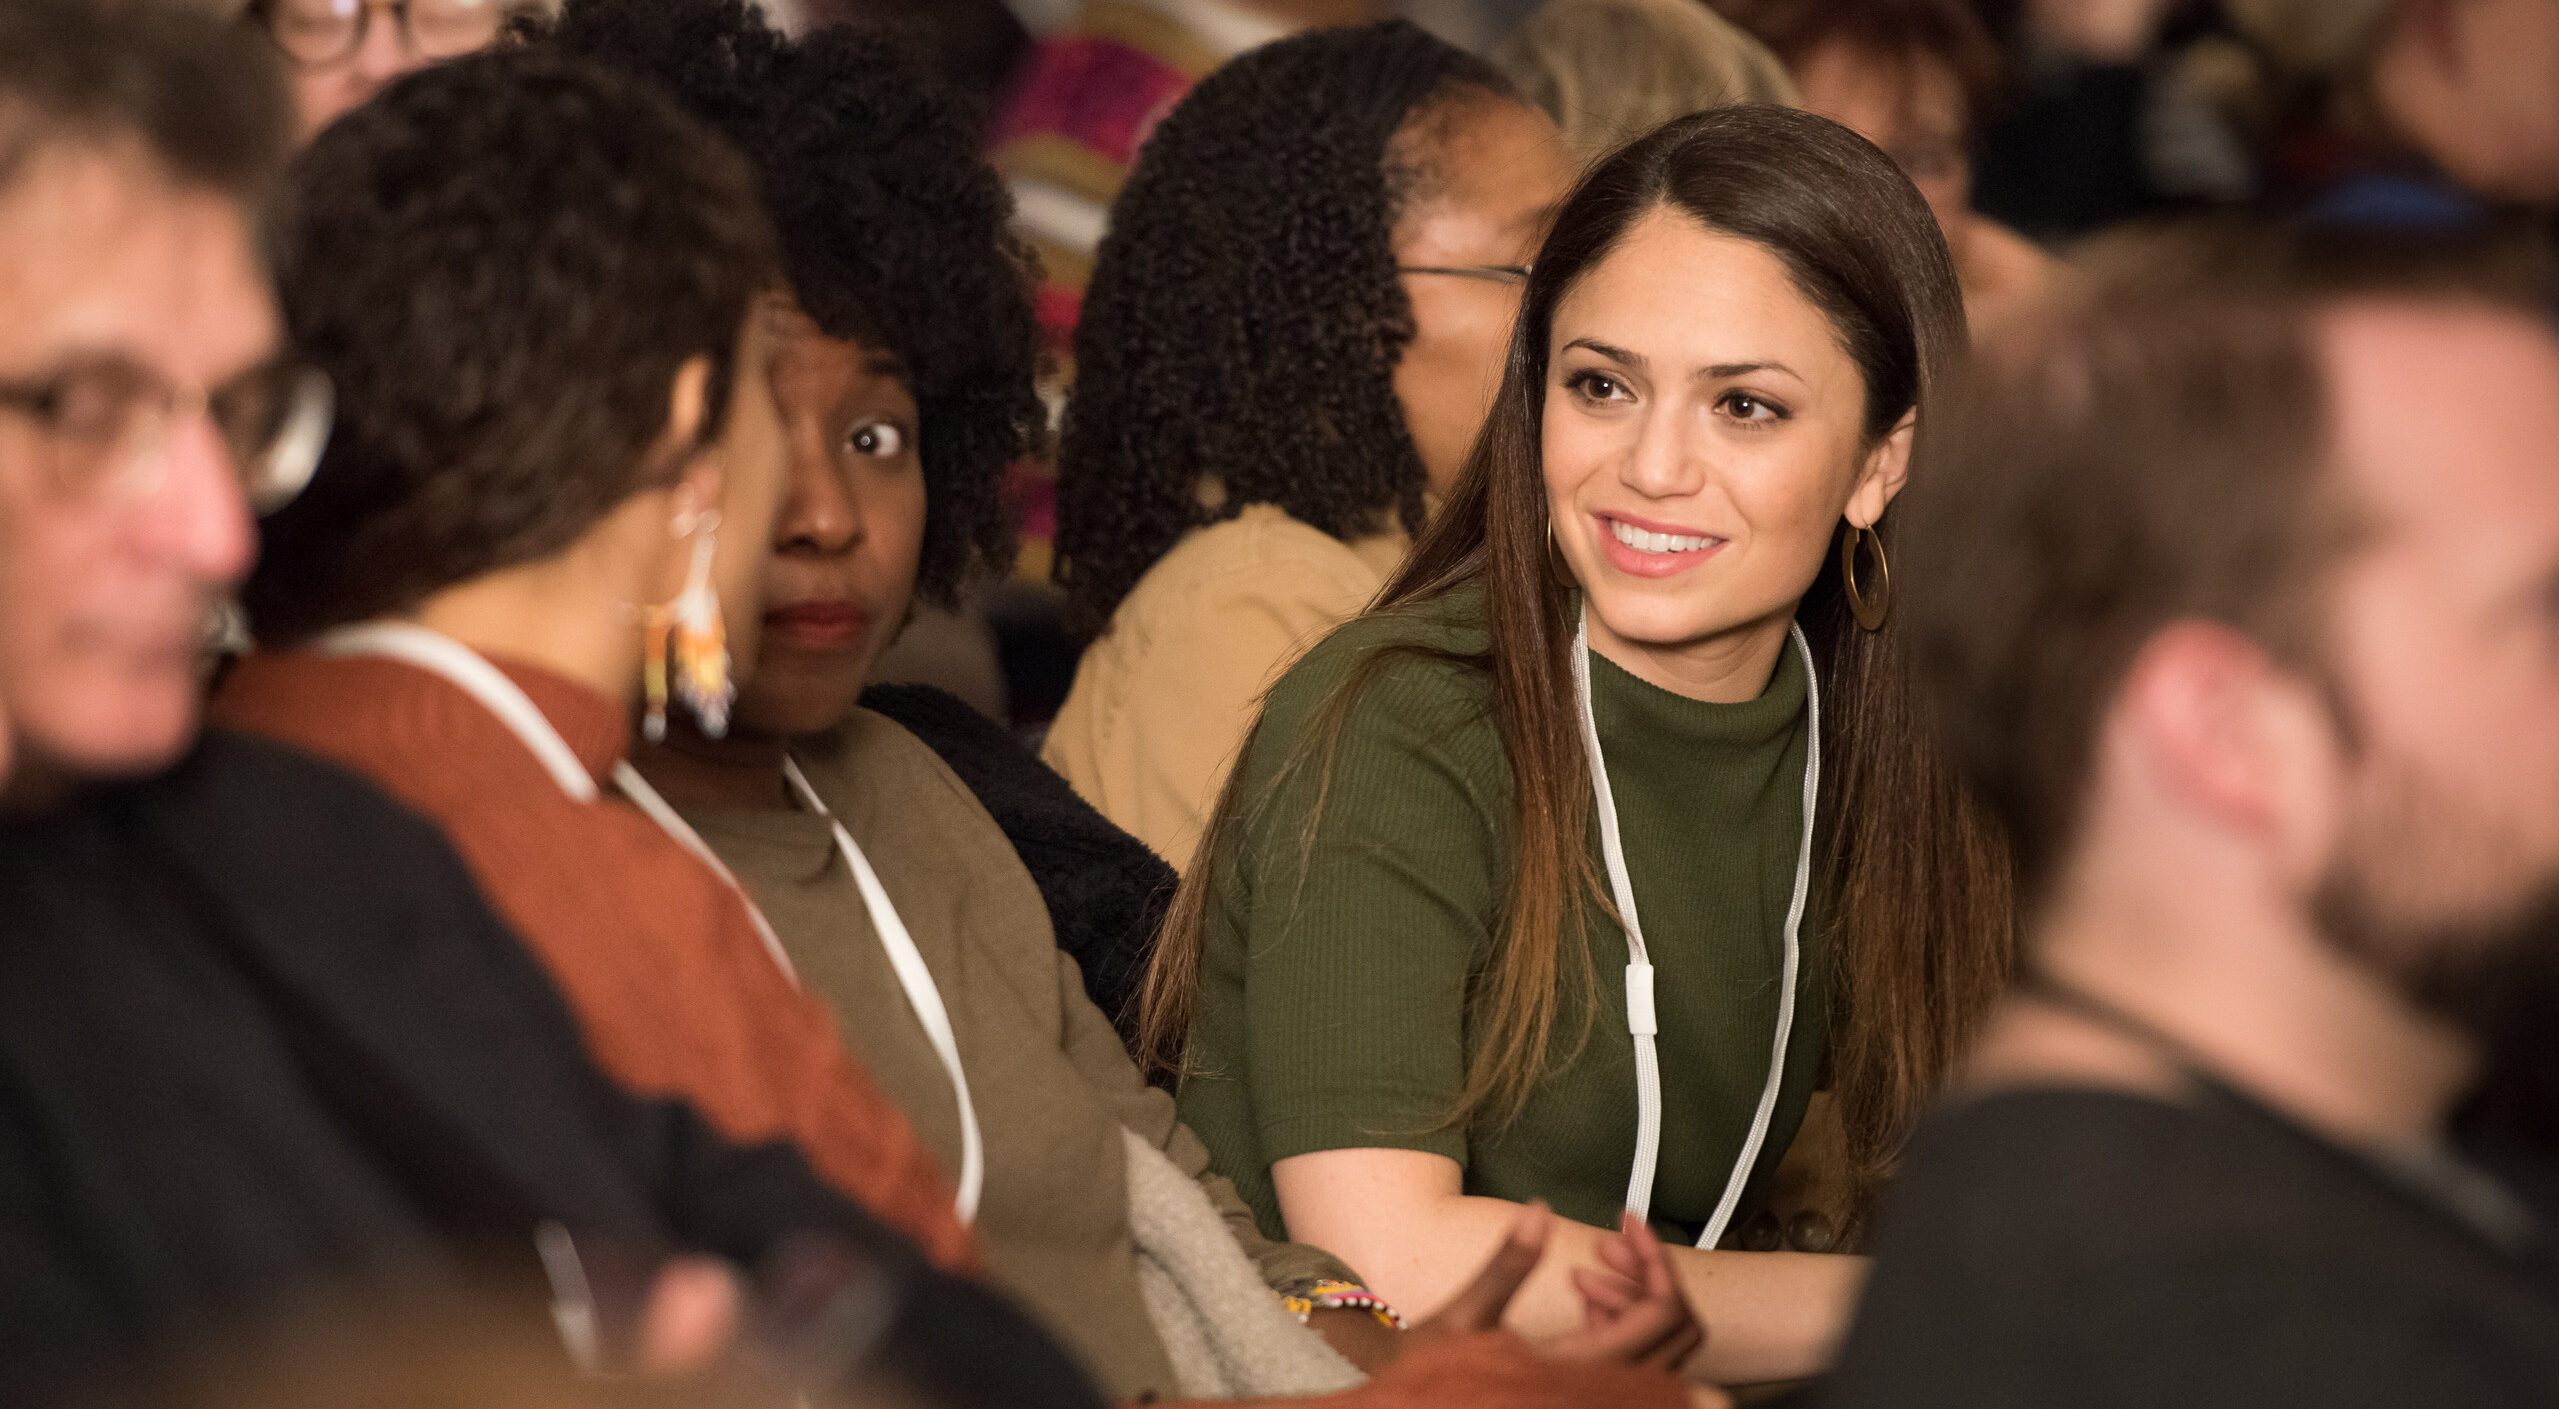 A medium light-skinned young adult smiles while listening to another adult speak a few seats over from her in a full auditorium.